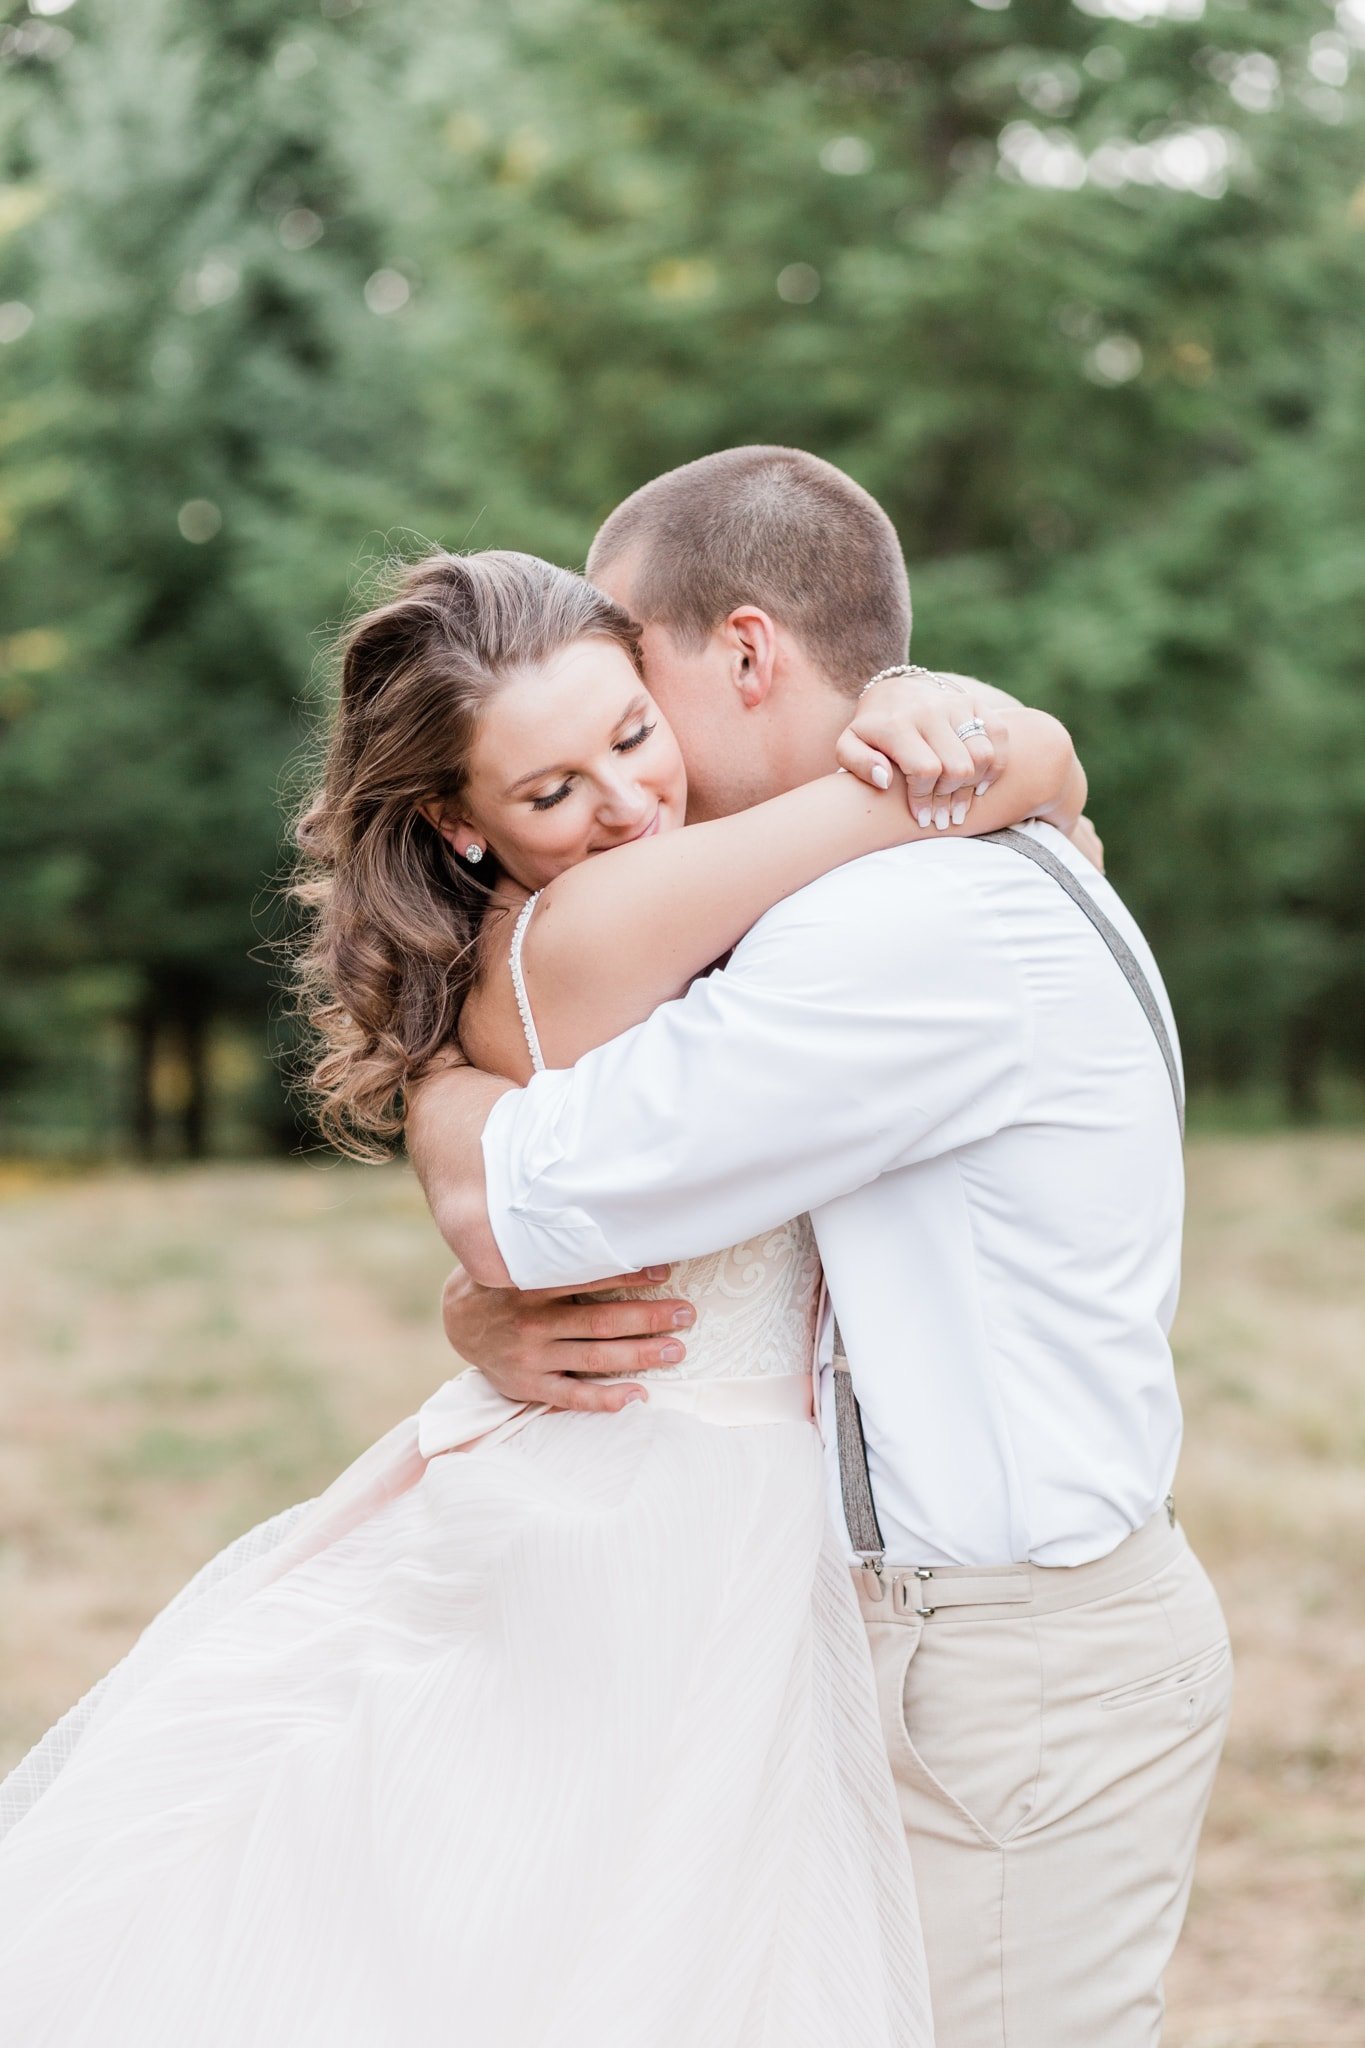 Bride and Groom hug during sunset photos